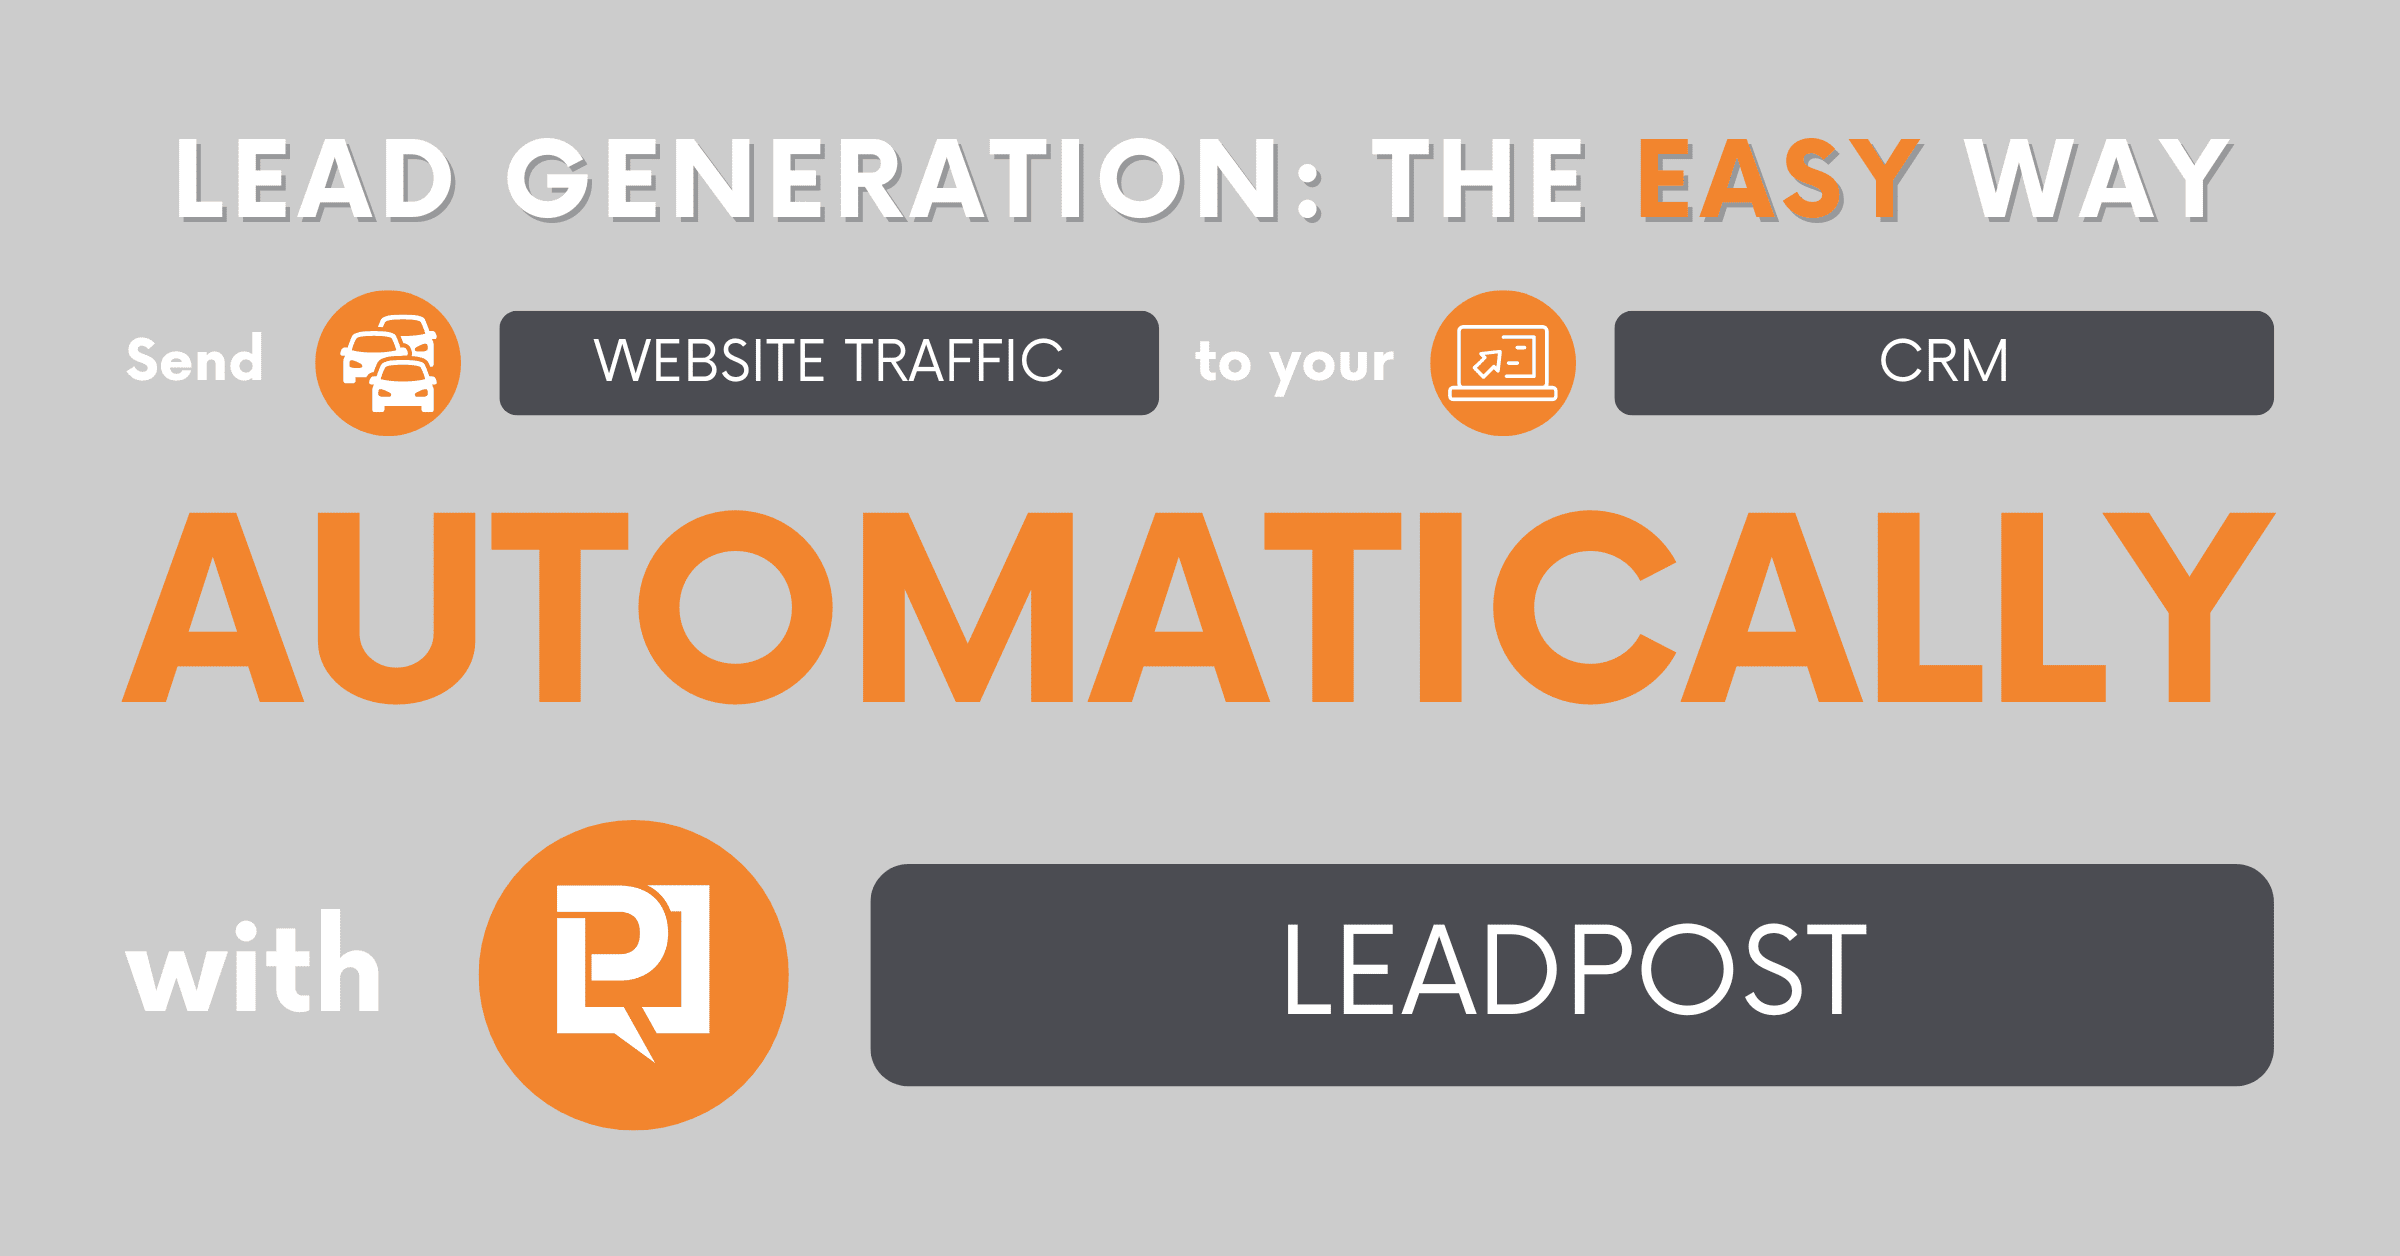 How to Generate Leads with LeadPost